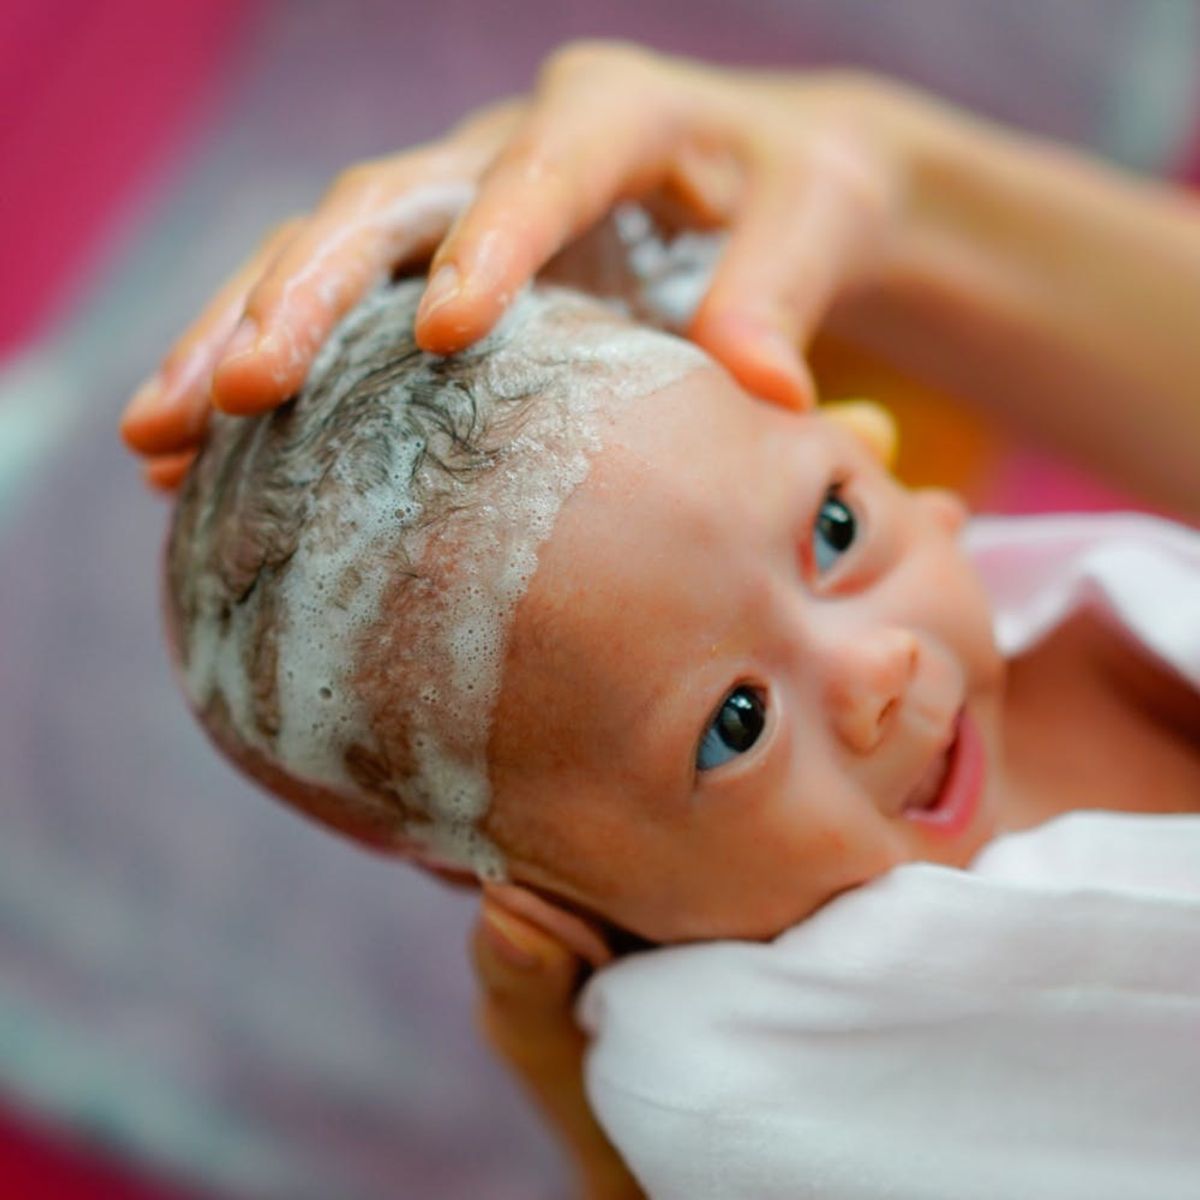 What You Need to Know Before Your Baby’s First Bath